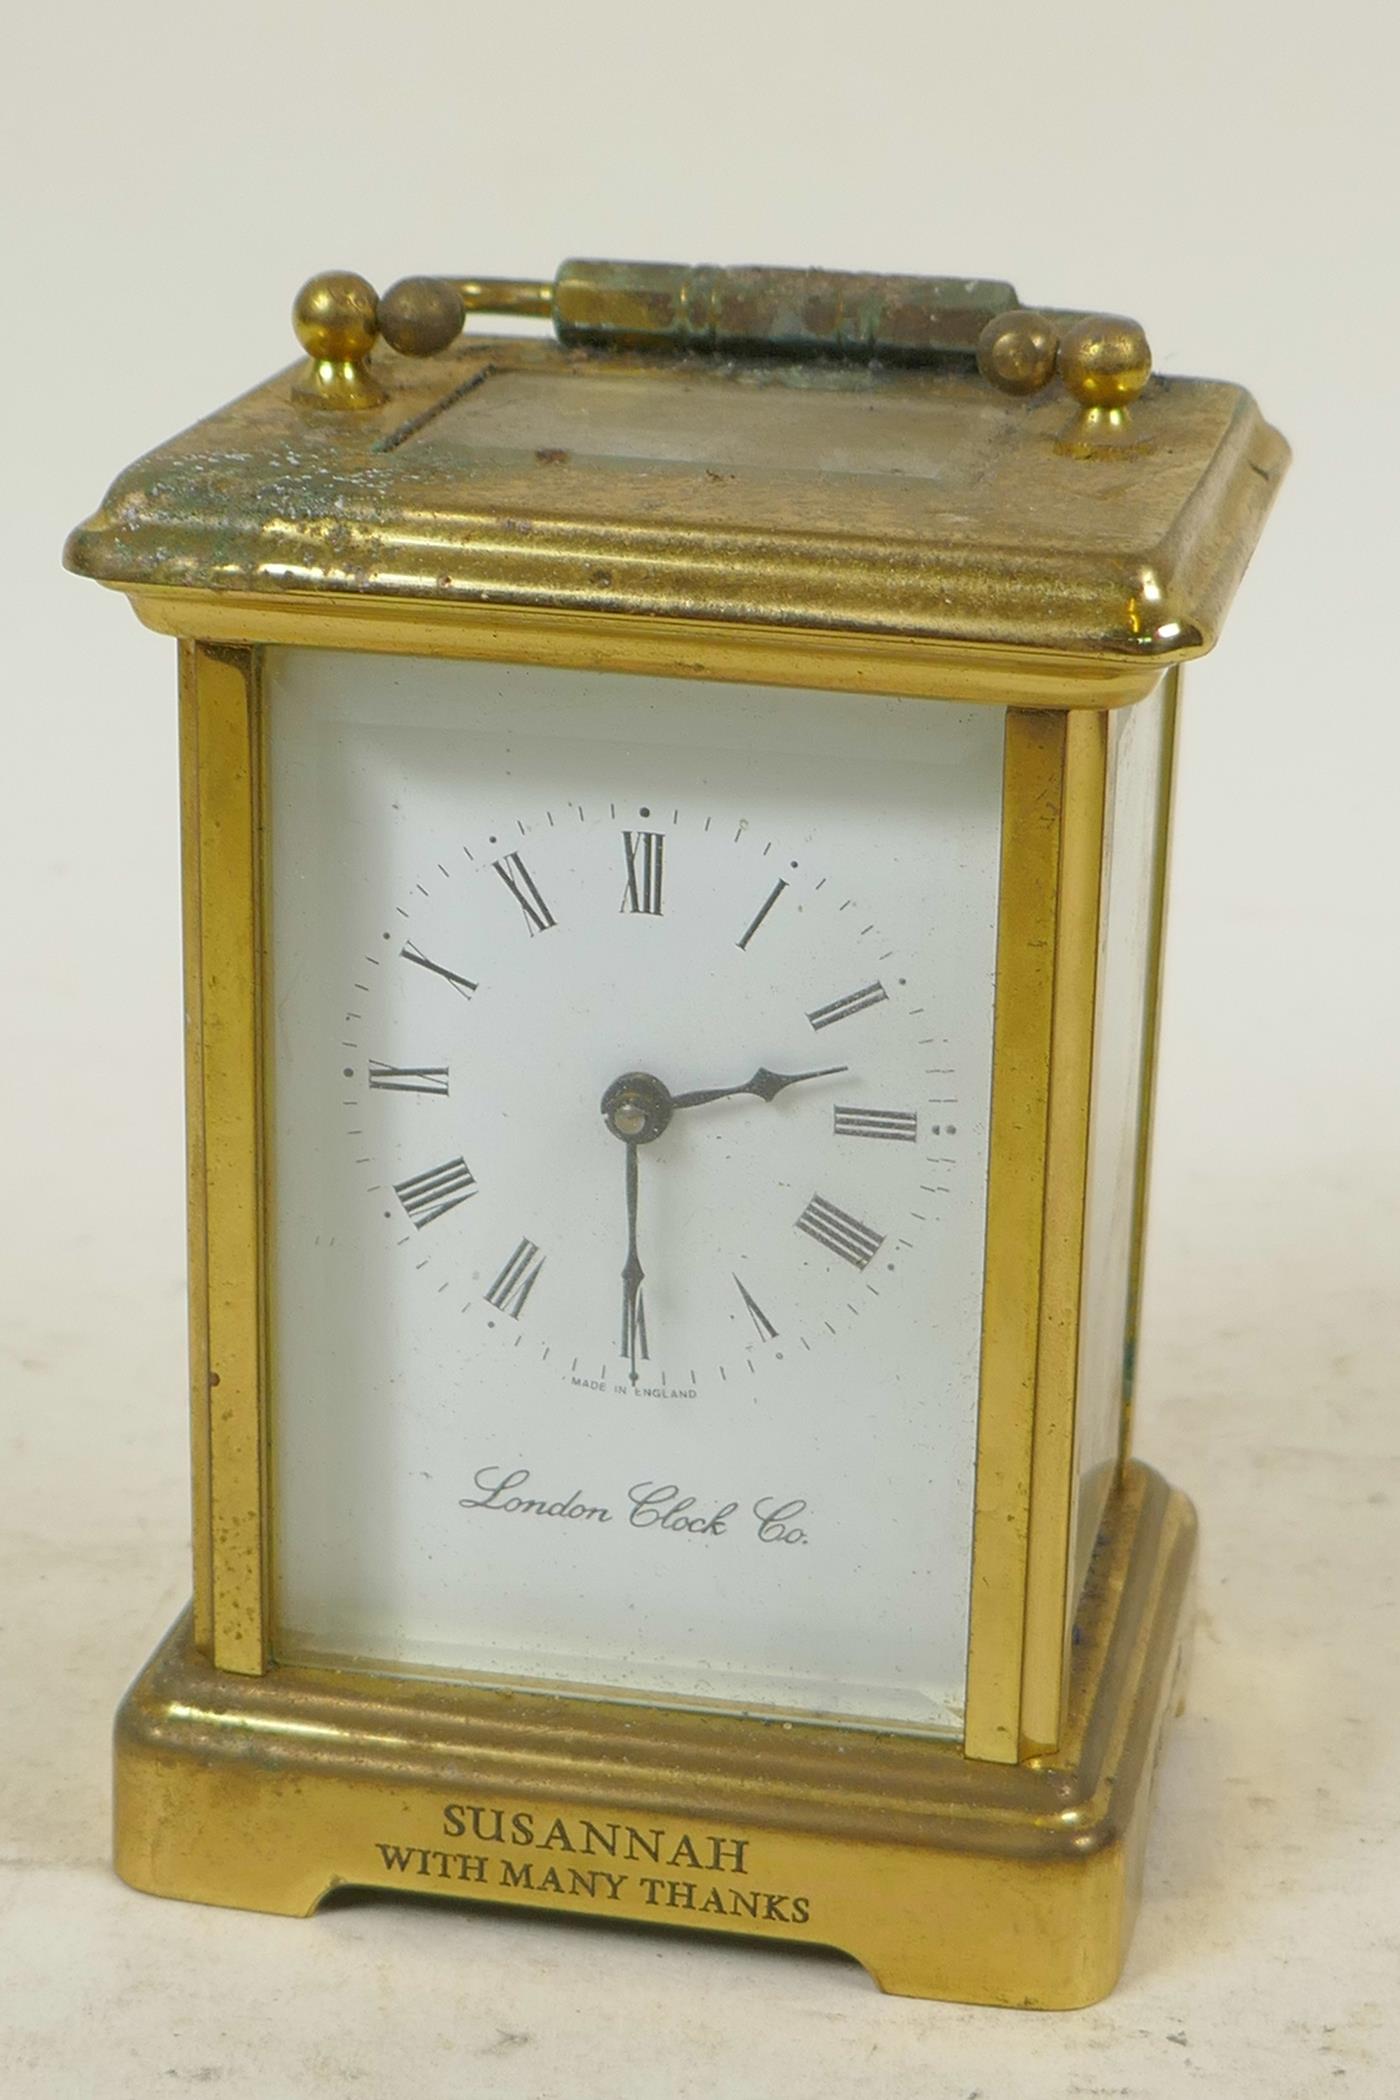 A brass cased carriage clock from the London Clock Company with white enamel dial and Roman